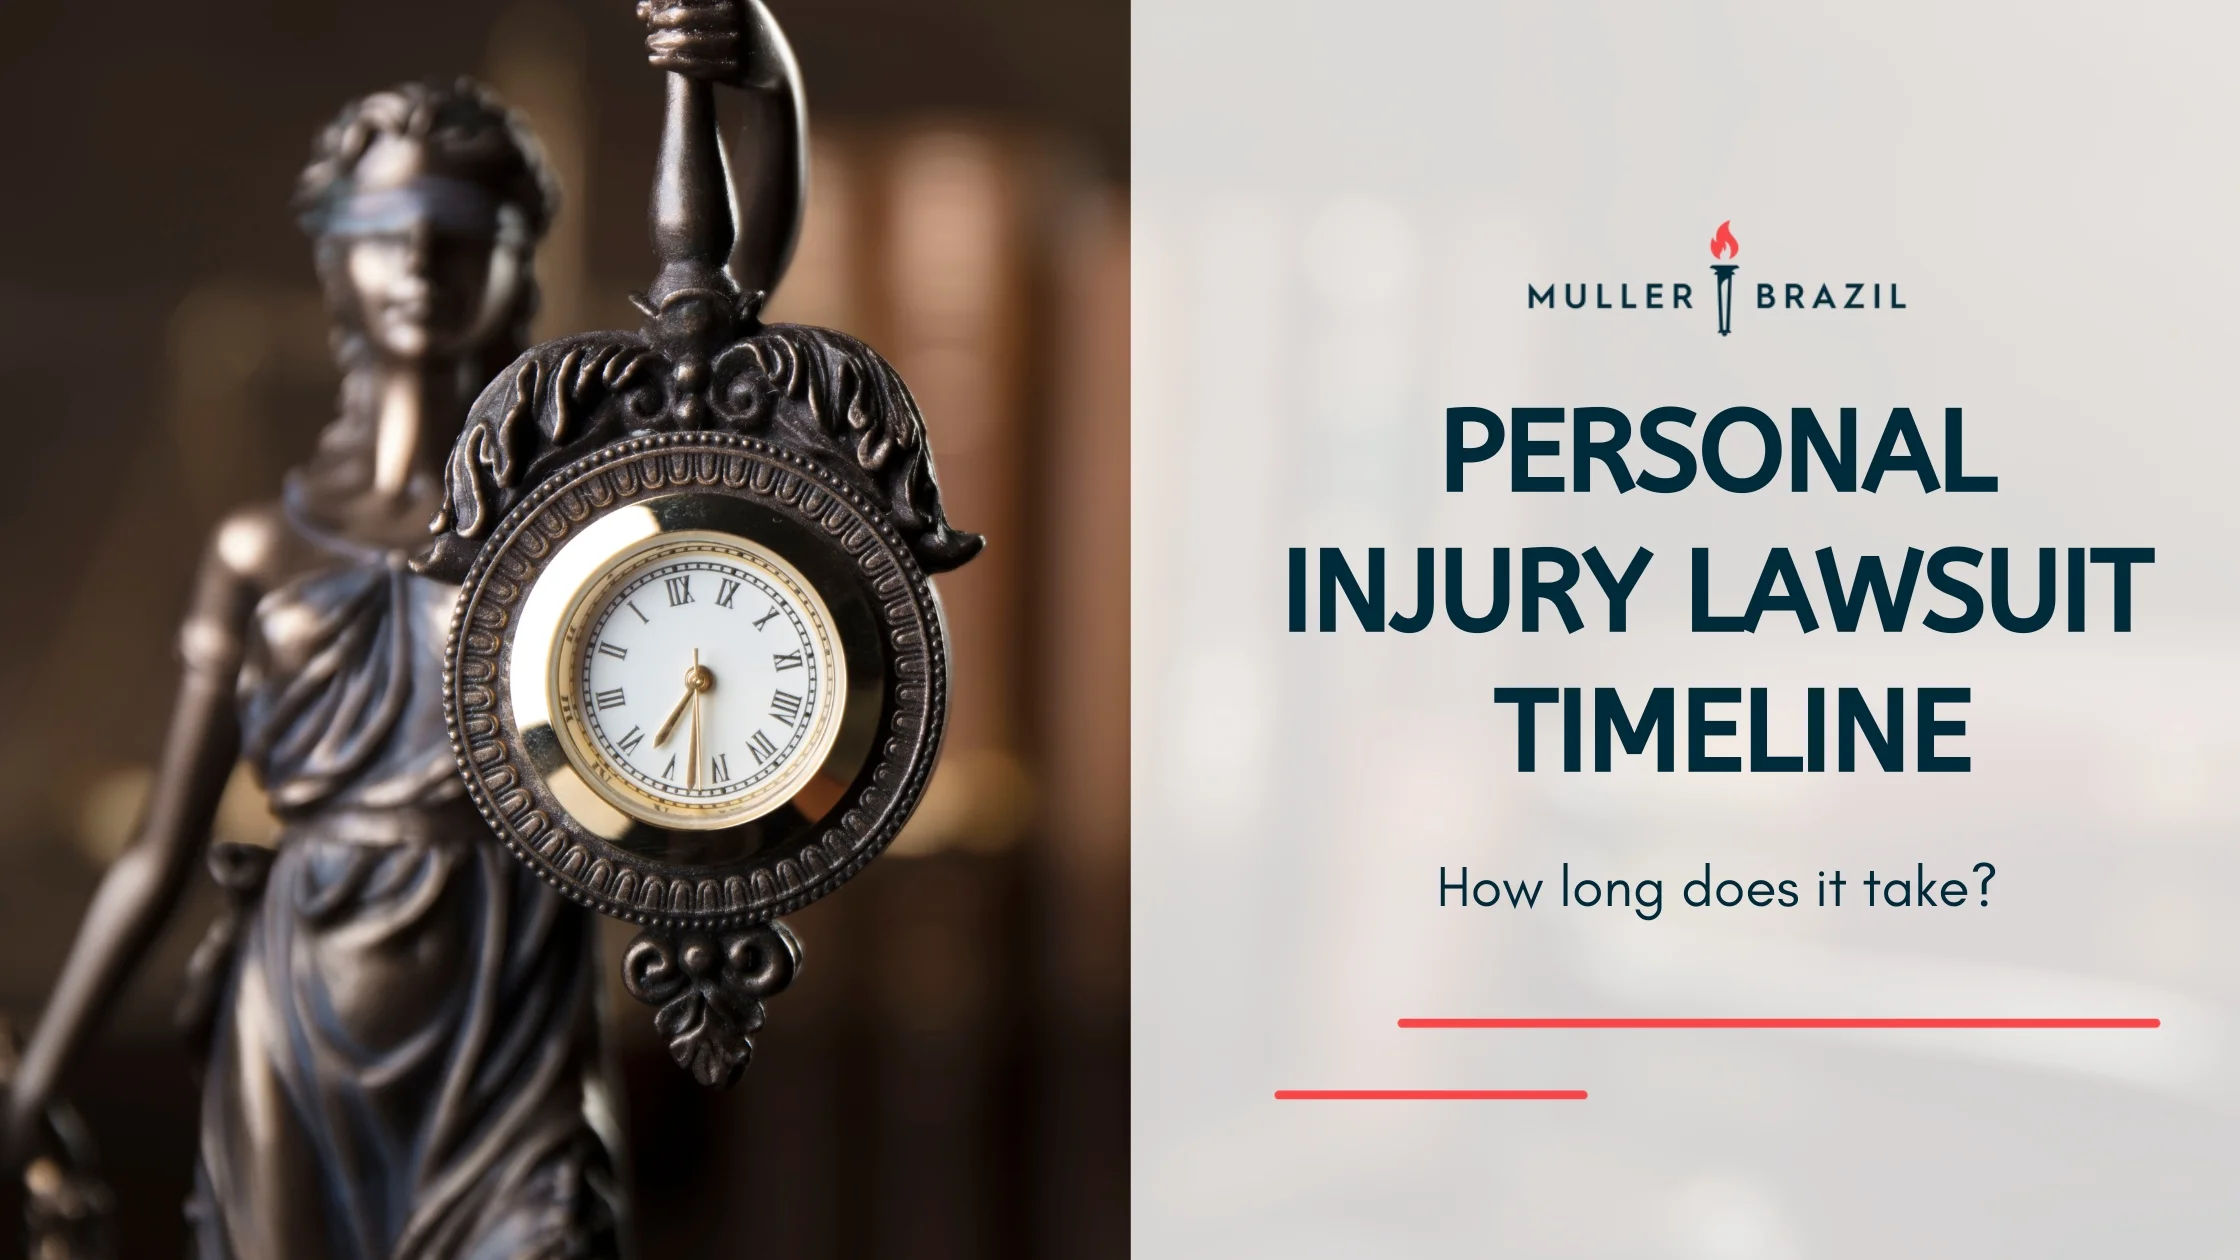 Blog featured image of a brown statue holding an analog clock and a caption that says “Personal Injury Lawsuit Timeline“